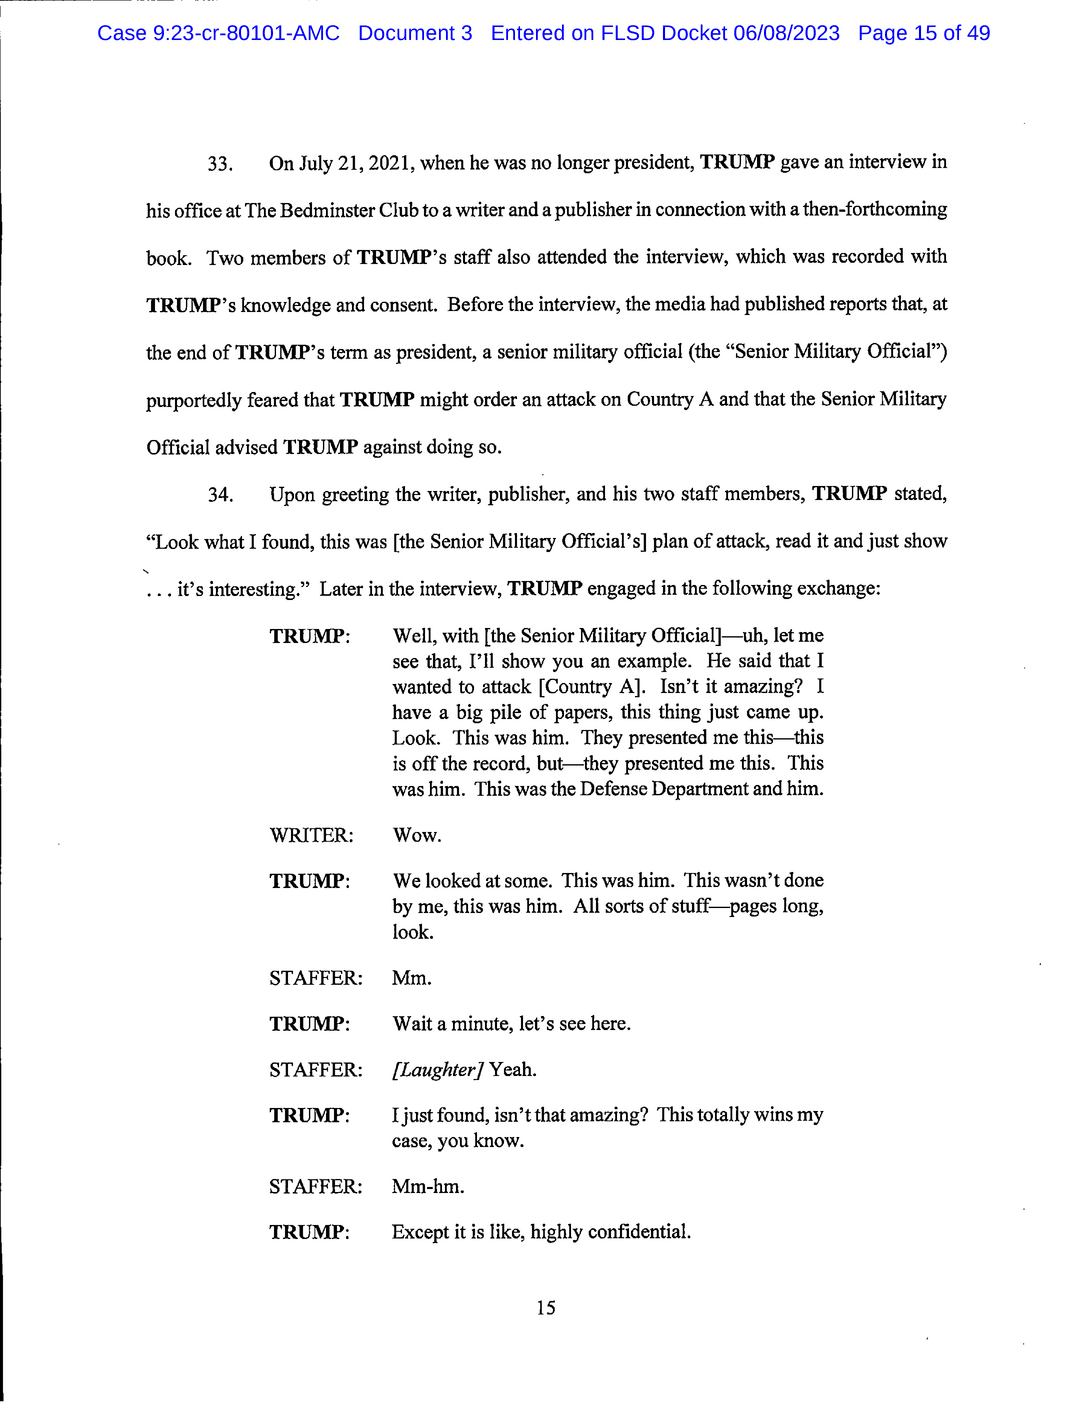 Page 15 of Donald Trump Classified Documents Indictment PDF document.